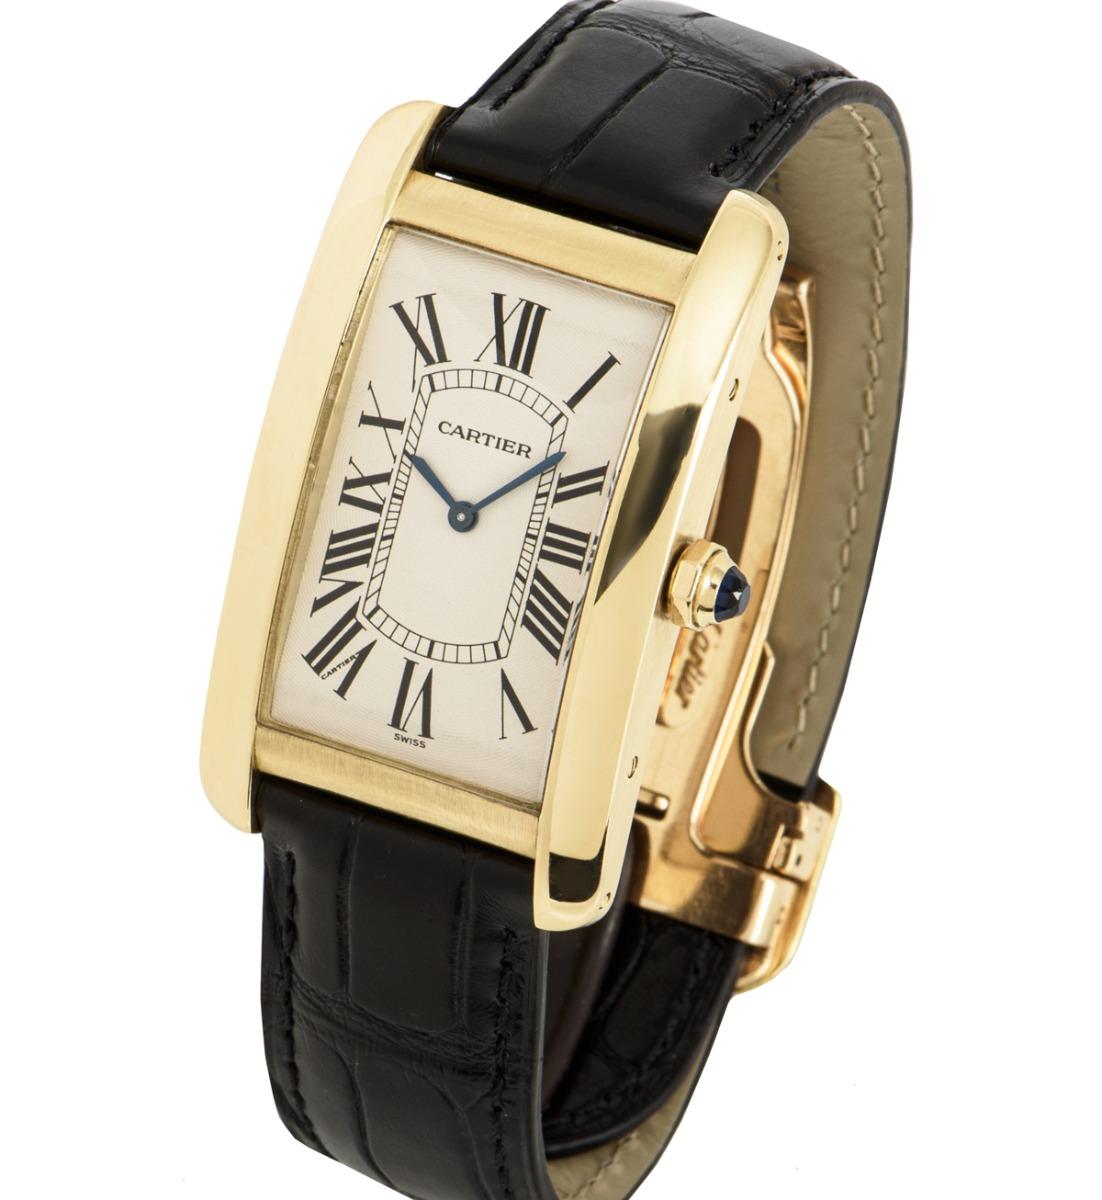 A 27 mm yellow gold Tank Americaine by Cartier. Features a silver dial with Roman numerals, sword-shaped hands in blued steel and a secret Cartier signature at V of VII. The faceted crown is set with a synthetic spinel.

An original deployant clasp